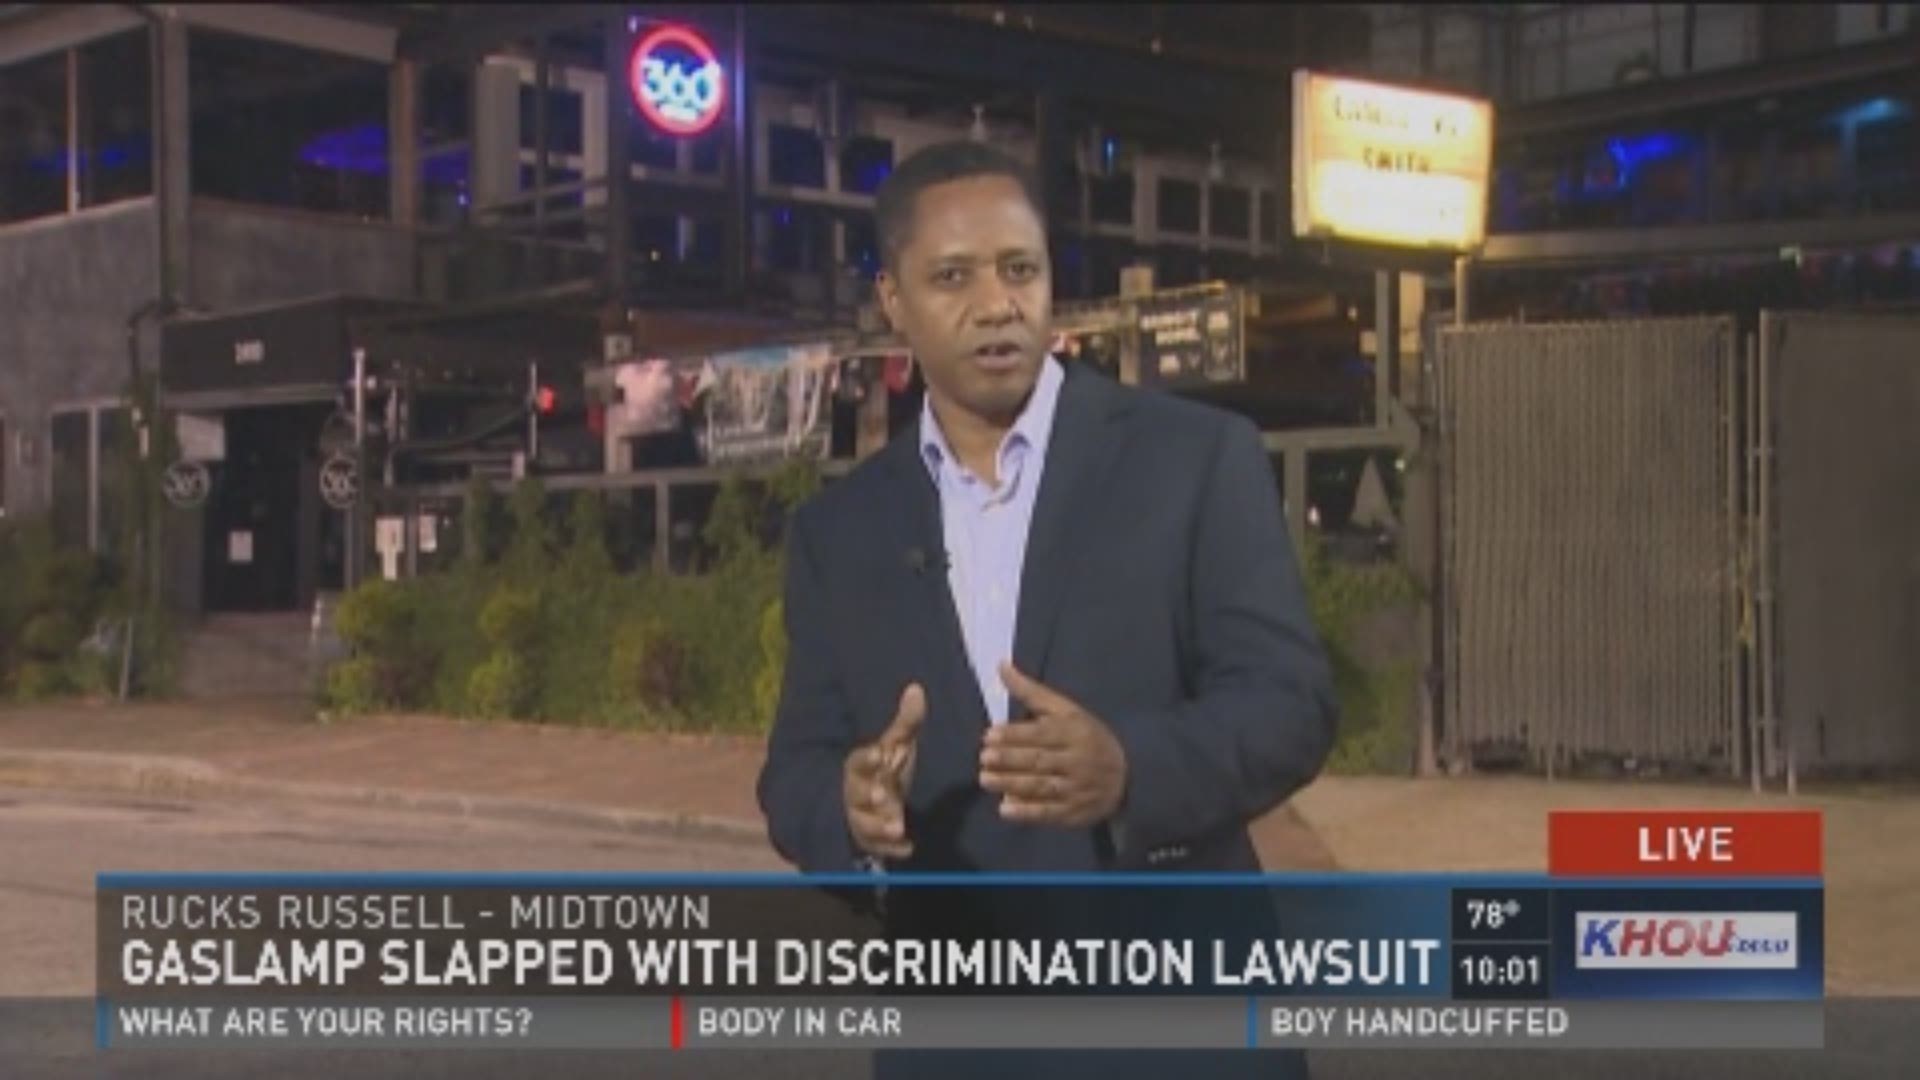 The Department of Justice has filed a discrimination lawsuit against 360 Midtown, formerly known as The Gaslamp, after receiving numerous complaints from minorities.